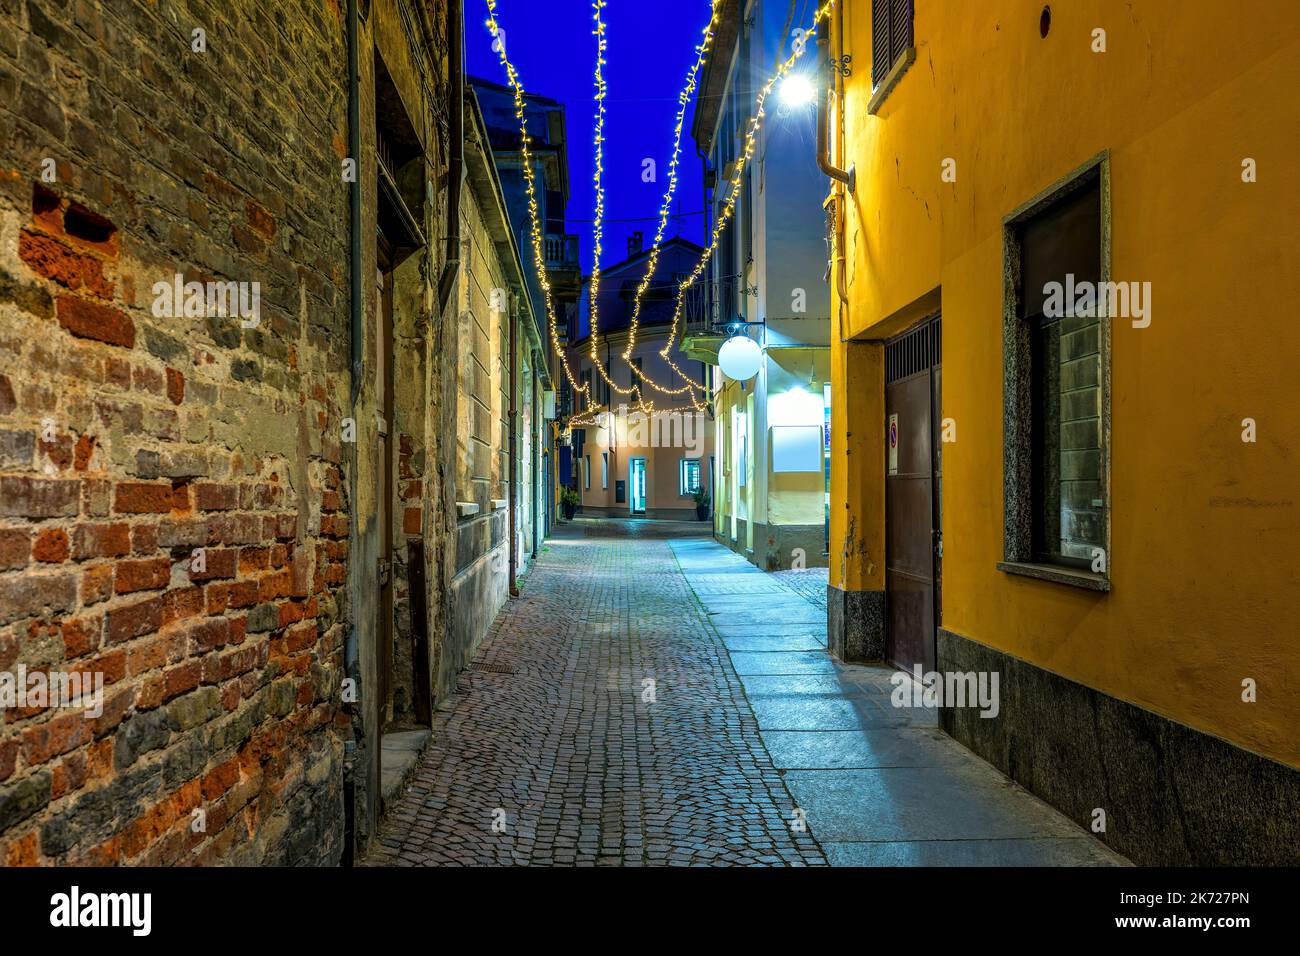 Narrow cobblestone street among old houses illuminated with Christmas lights in evening in Alba, Piedmont, Northern Italy. Stock Photo